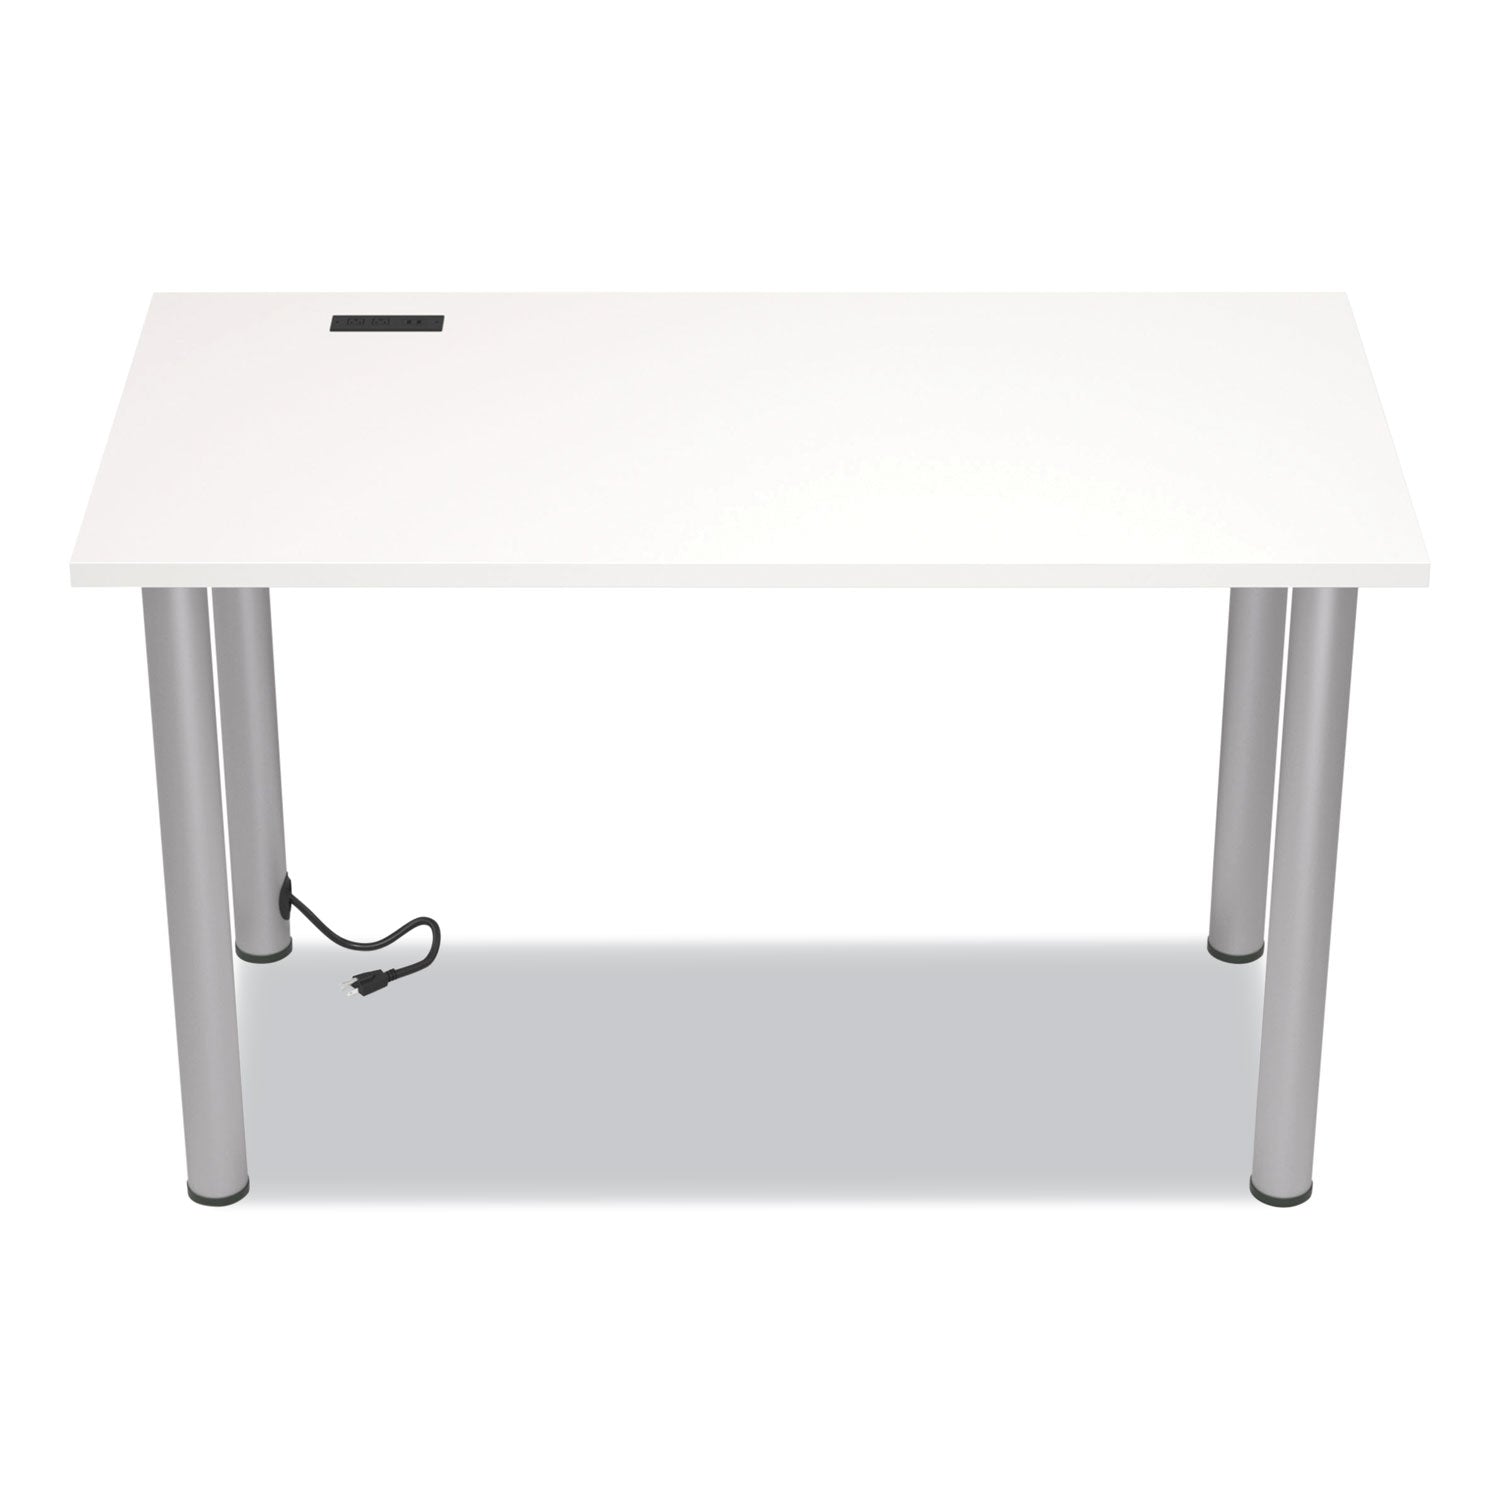 essentials-writing-table-desk-with-integrated-power-management-475-x-237-x-288-white-aluminum_uos24398970 - 2